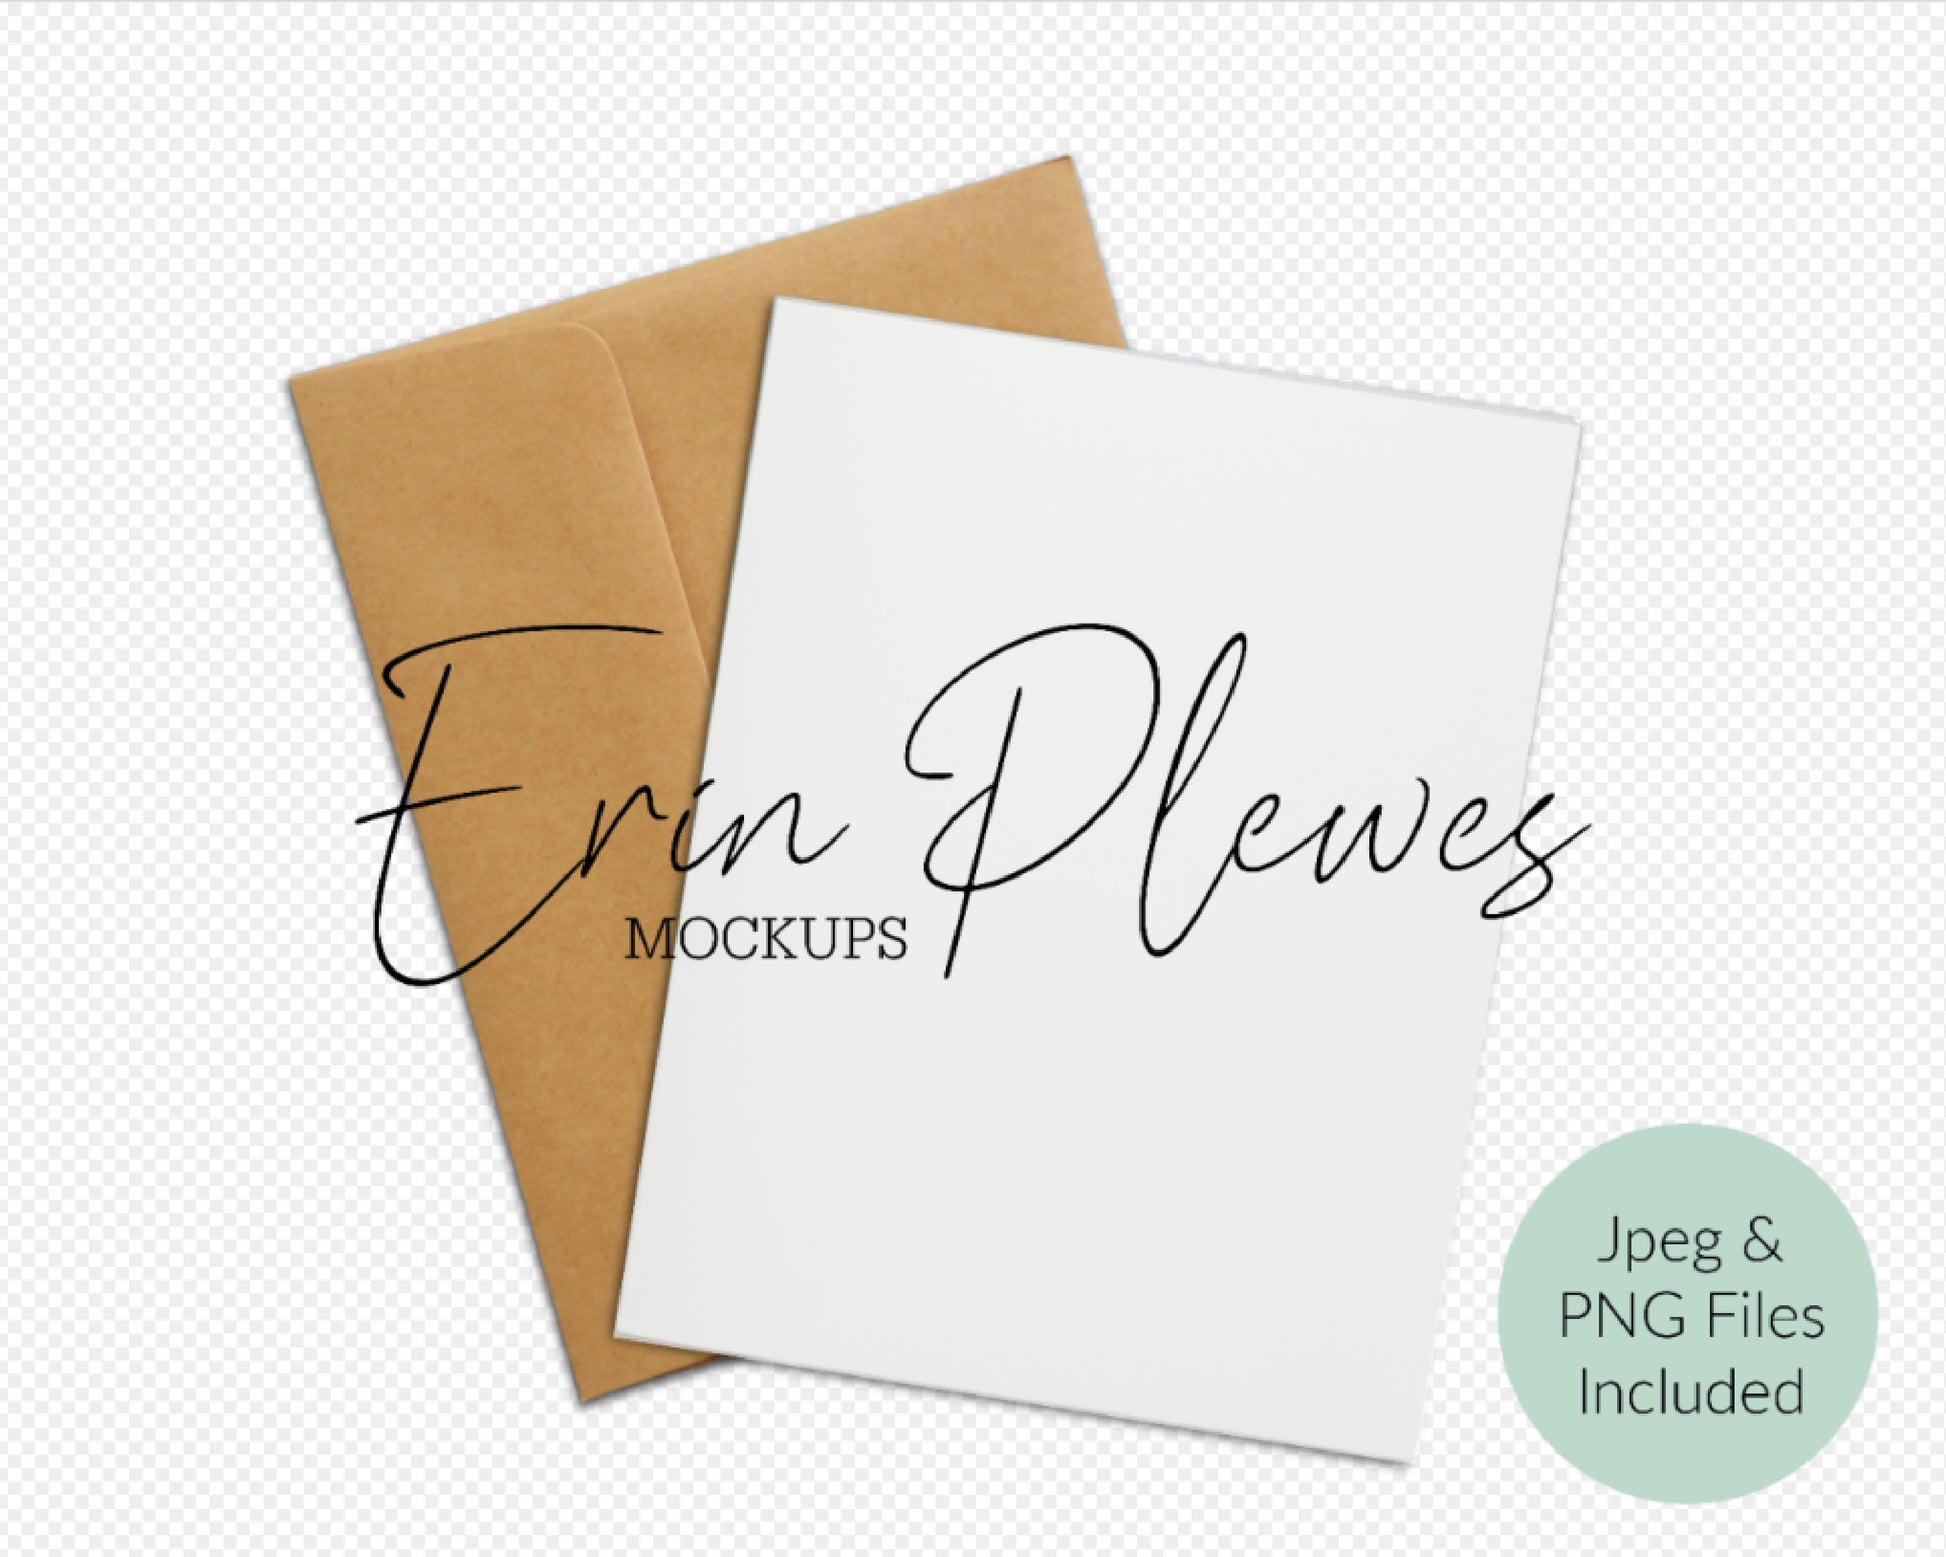 A2 Card Mockup, Greeting card mock-up with kraft envelope on white background, Minimalist lifestyle photo, Jpeg PNG Instant Digital Download